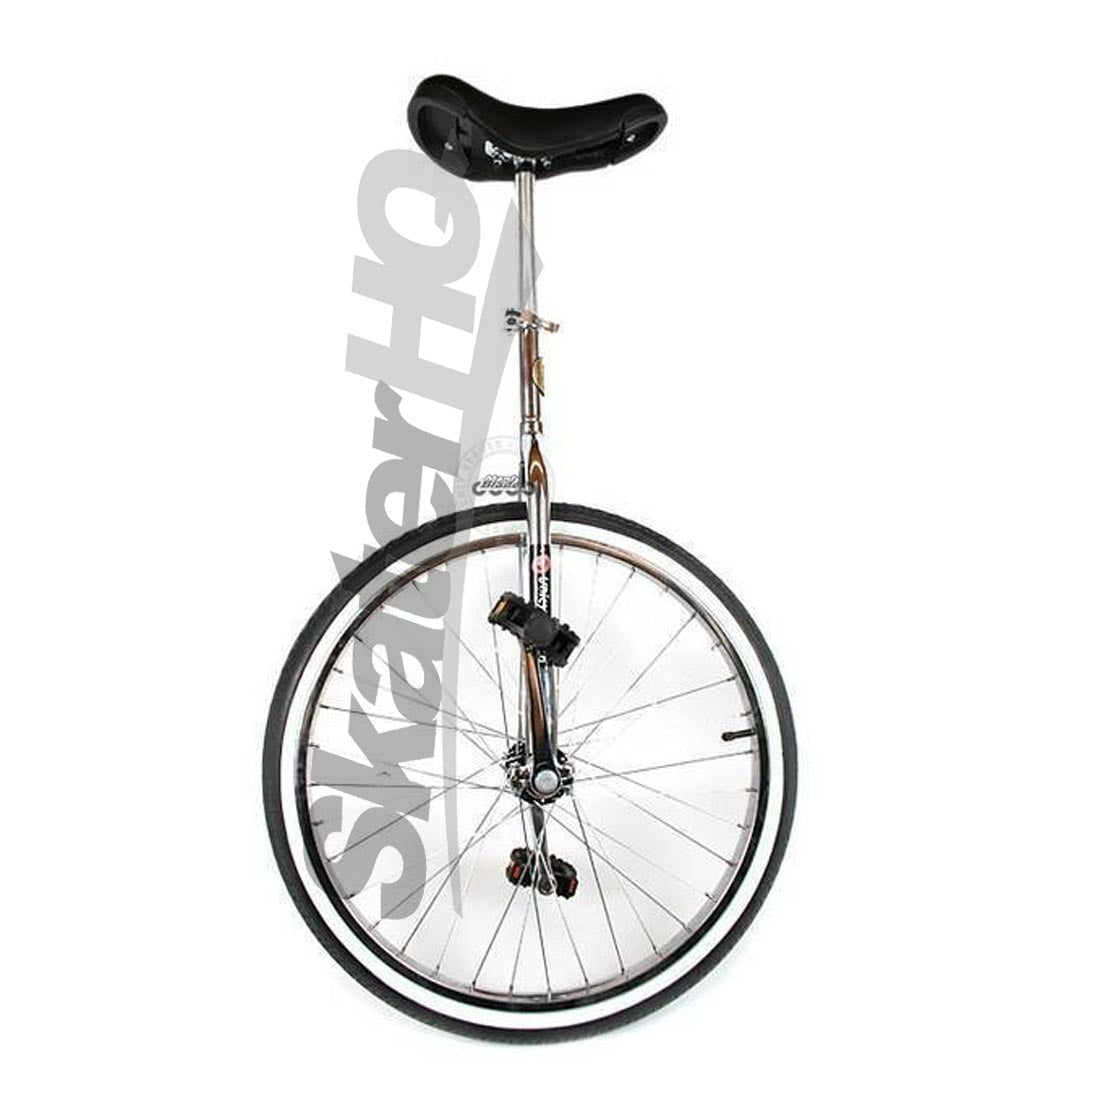 Axis Trainer 24inch Unicycle - Silver Other Fun Toys